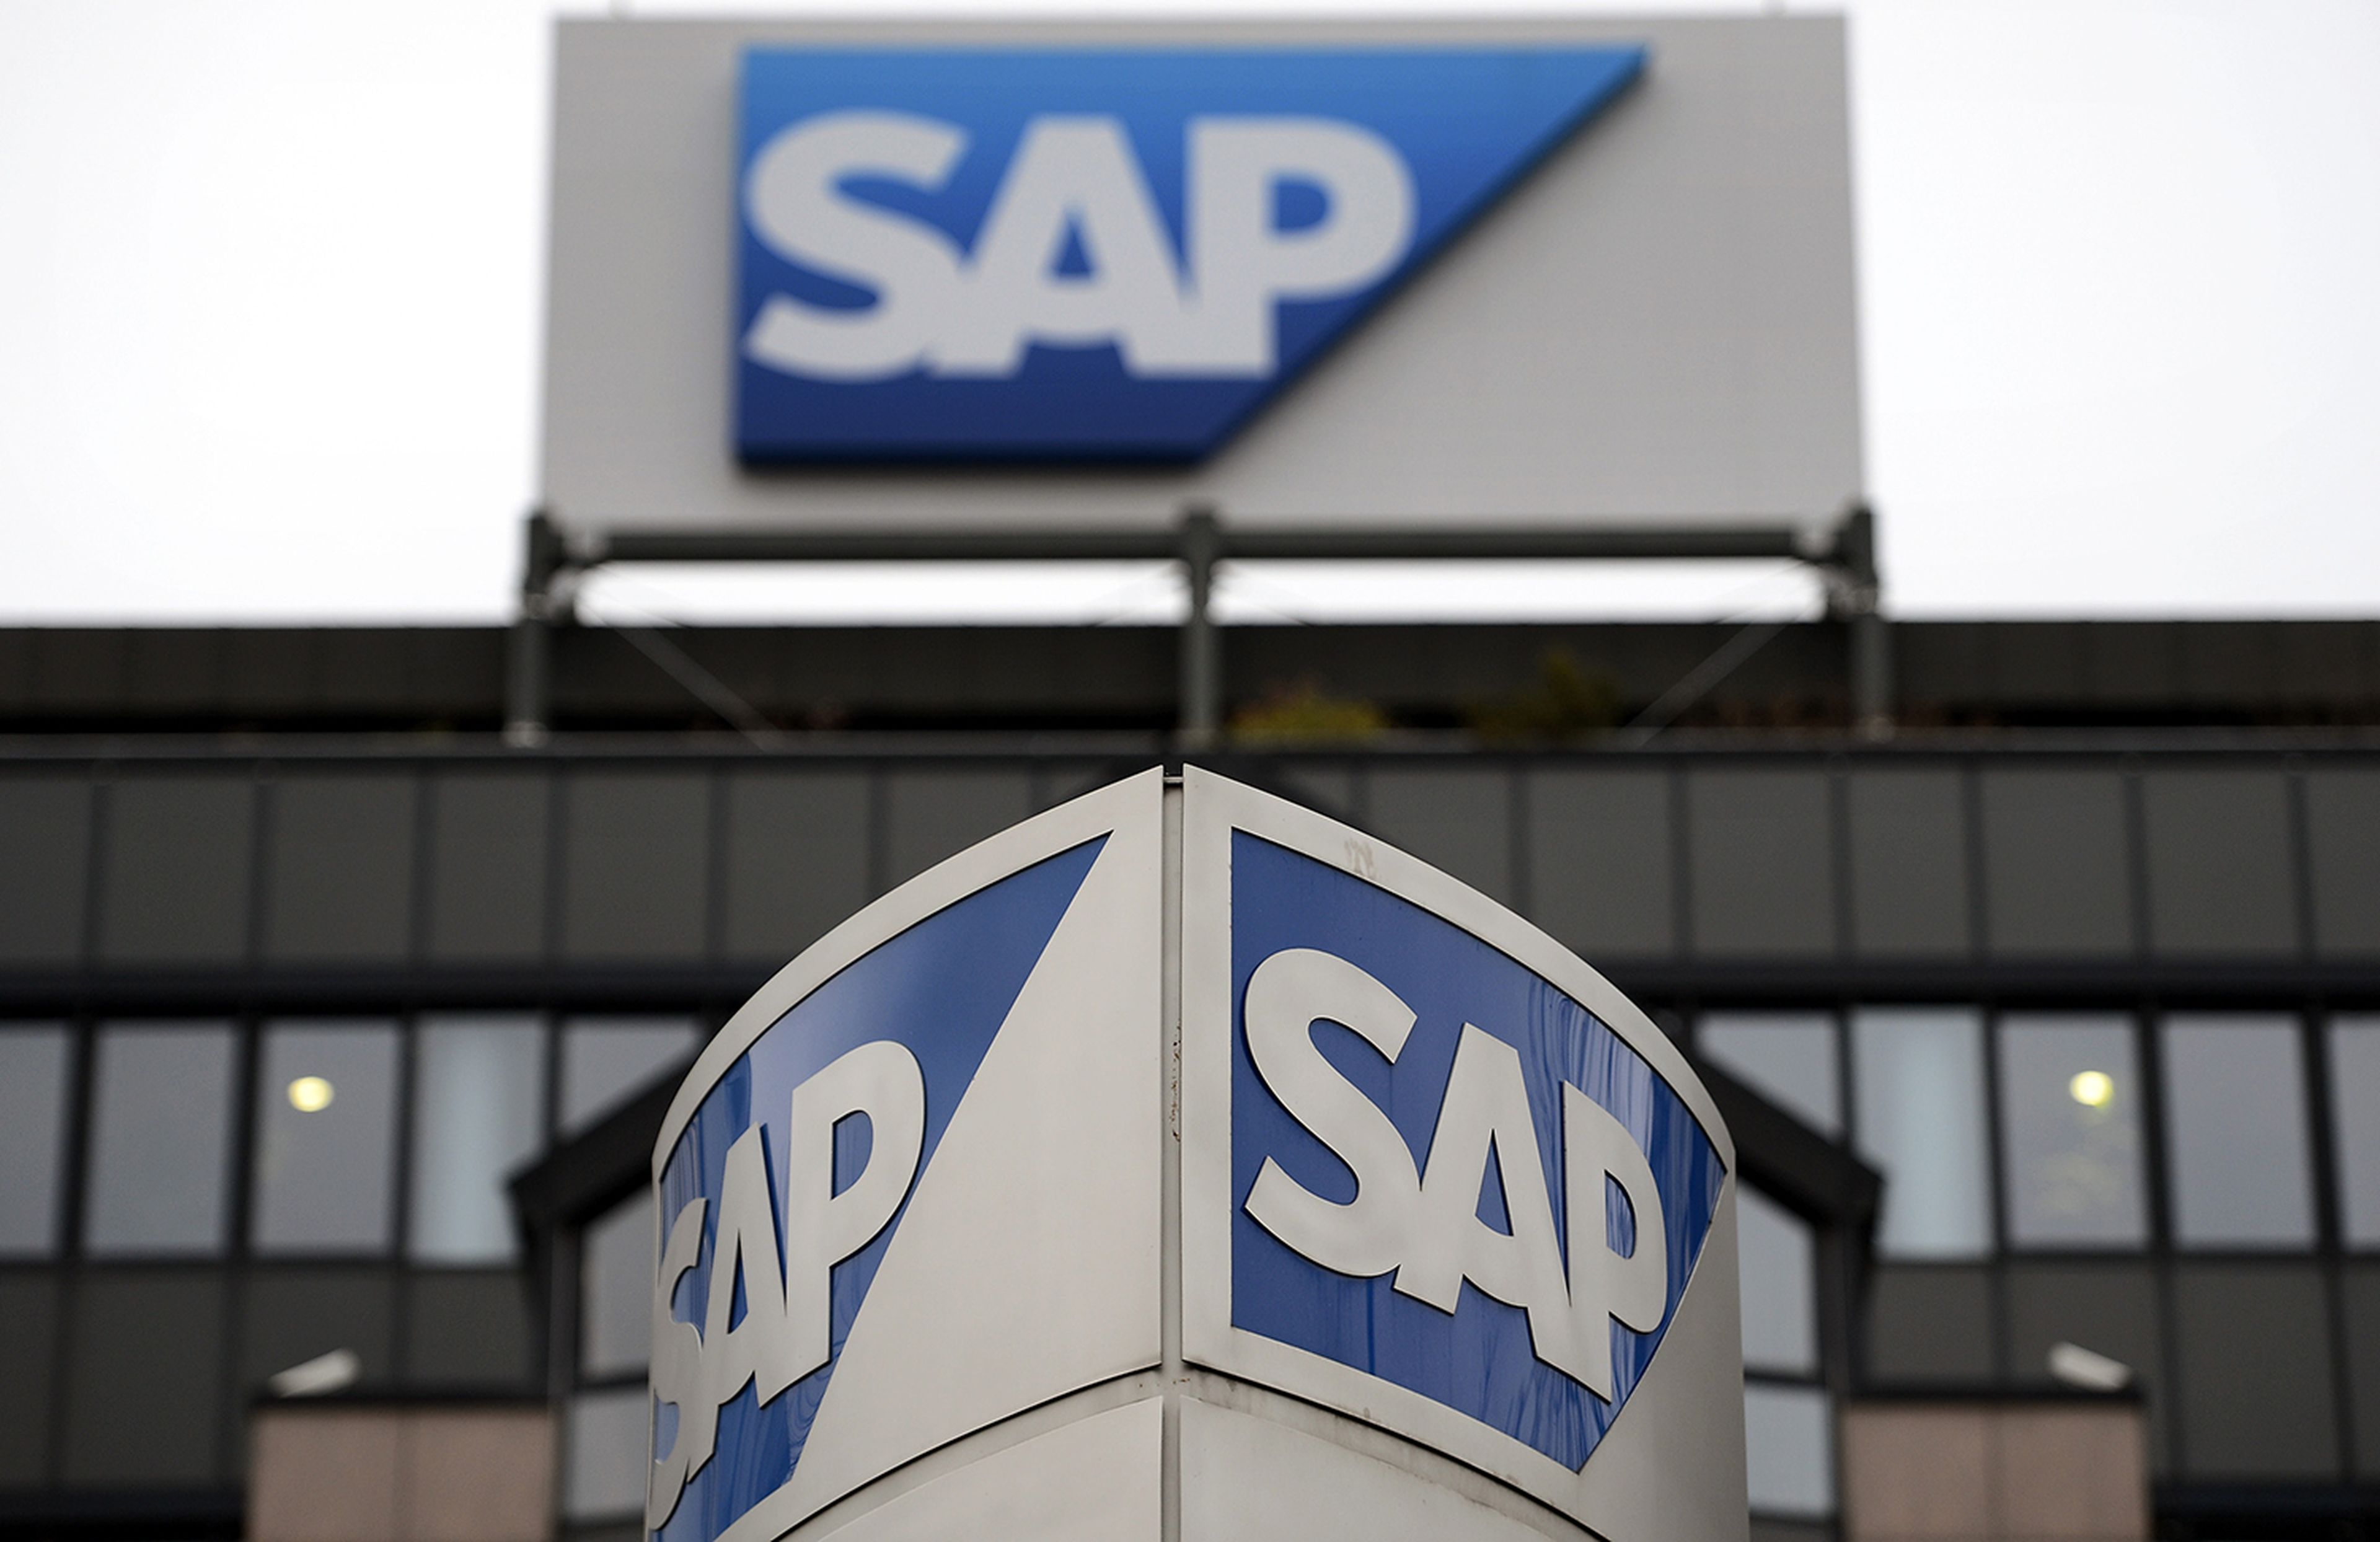 Signage at the headquarters of SAP AG, Germany&#8217;s largest software company, is seen Jan. 8, 2013, in Walldorf, Germany. (Photo by Thomas Lohnes/Getty Images)